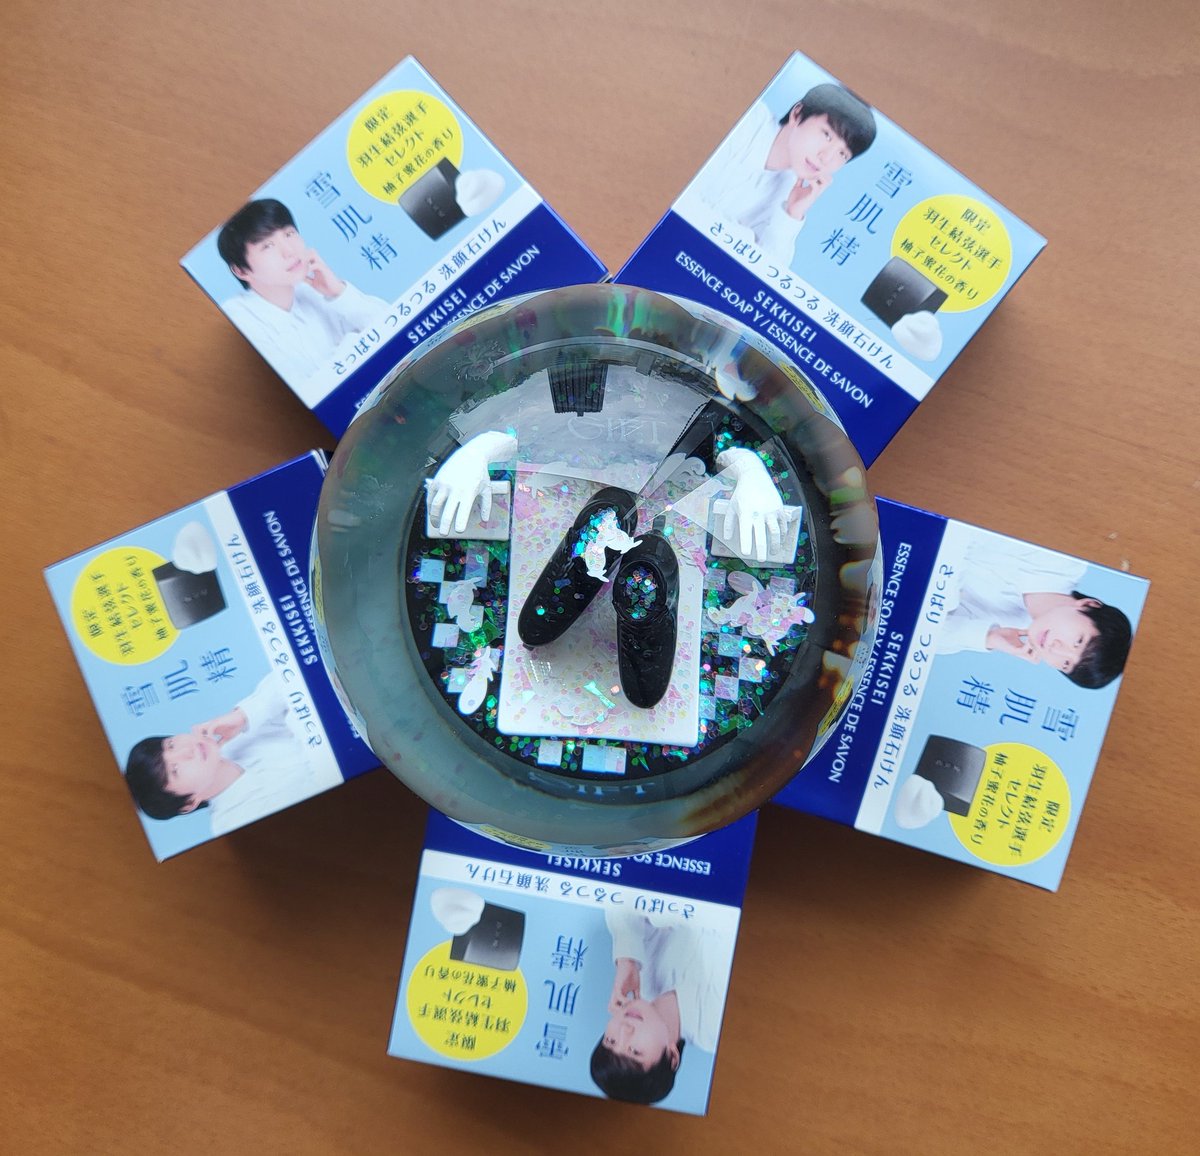 The perfect X'mas gift! It's affordable to purchase more than 1 - gift it to your team mates, house mate, family and friends!

#YuzuruHanyu
#羽生結弦
#Kosemy